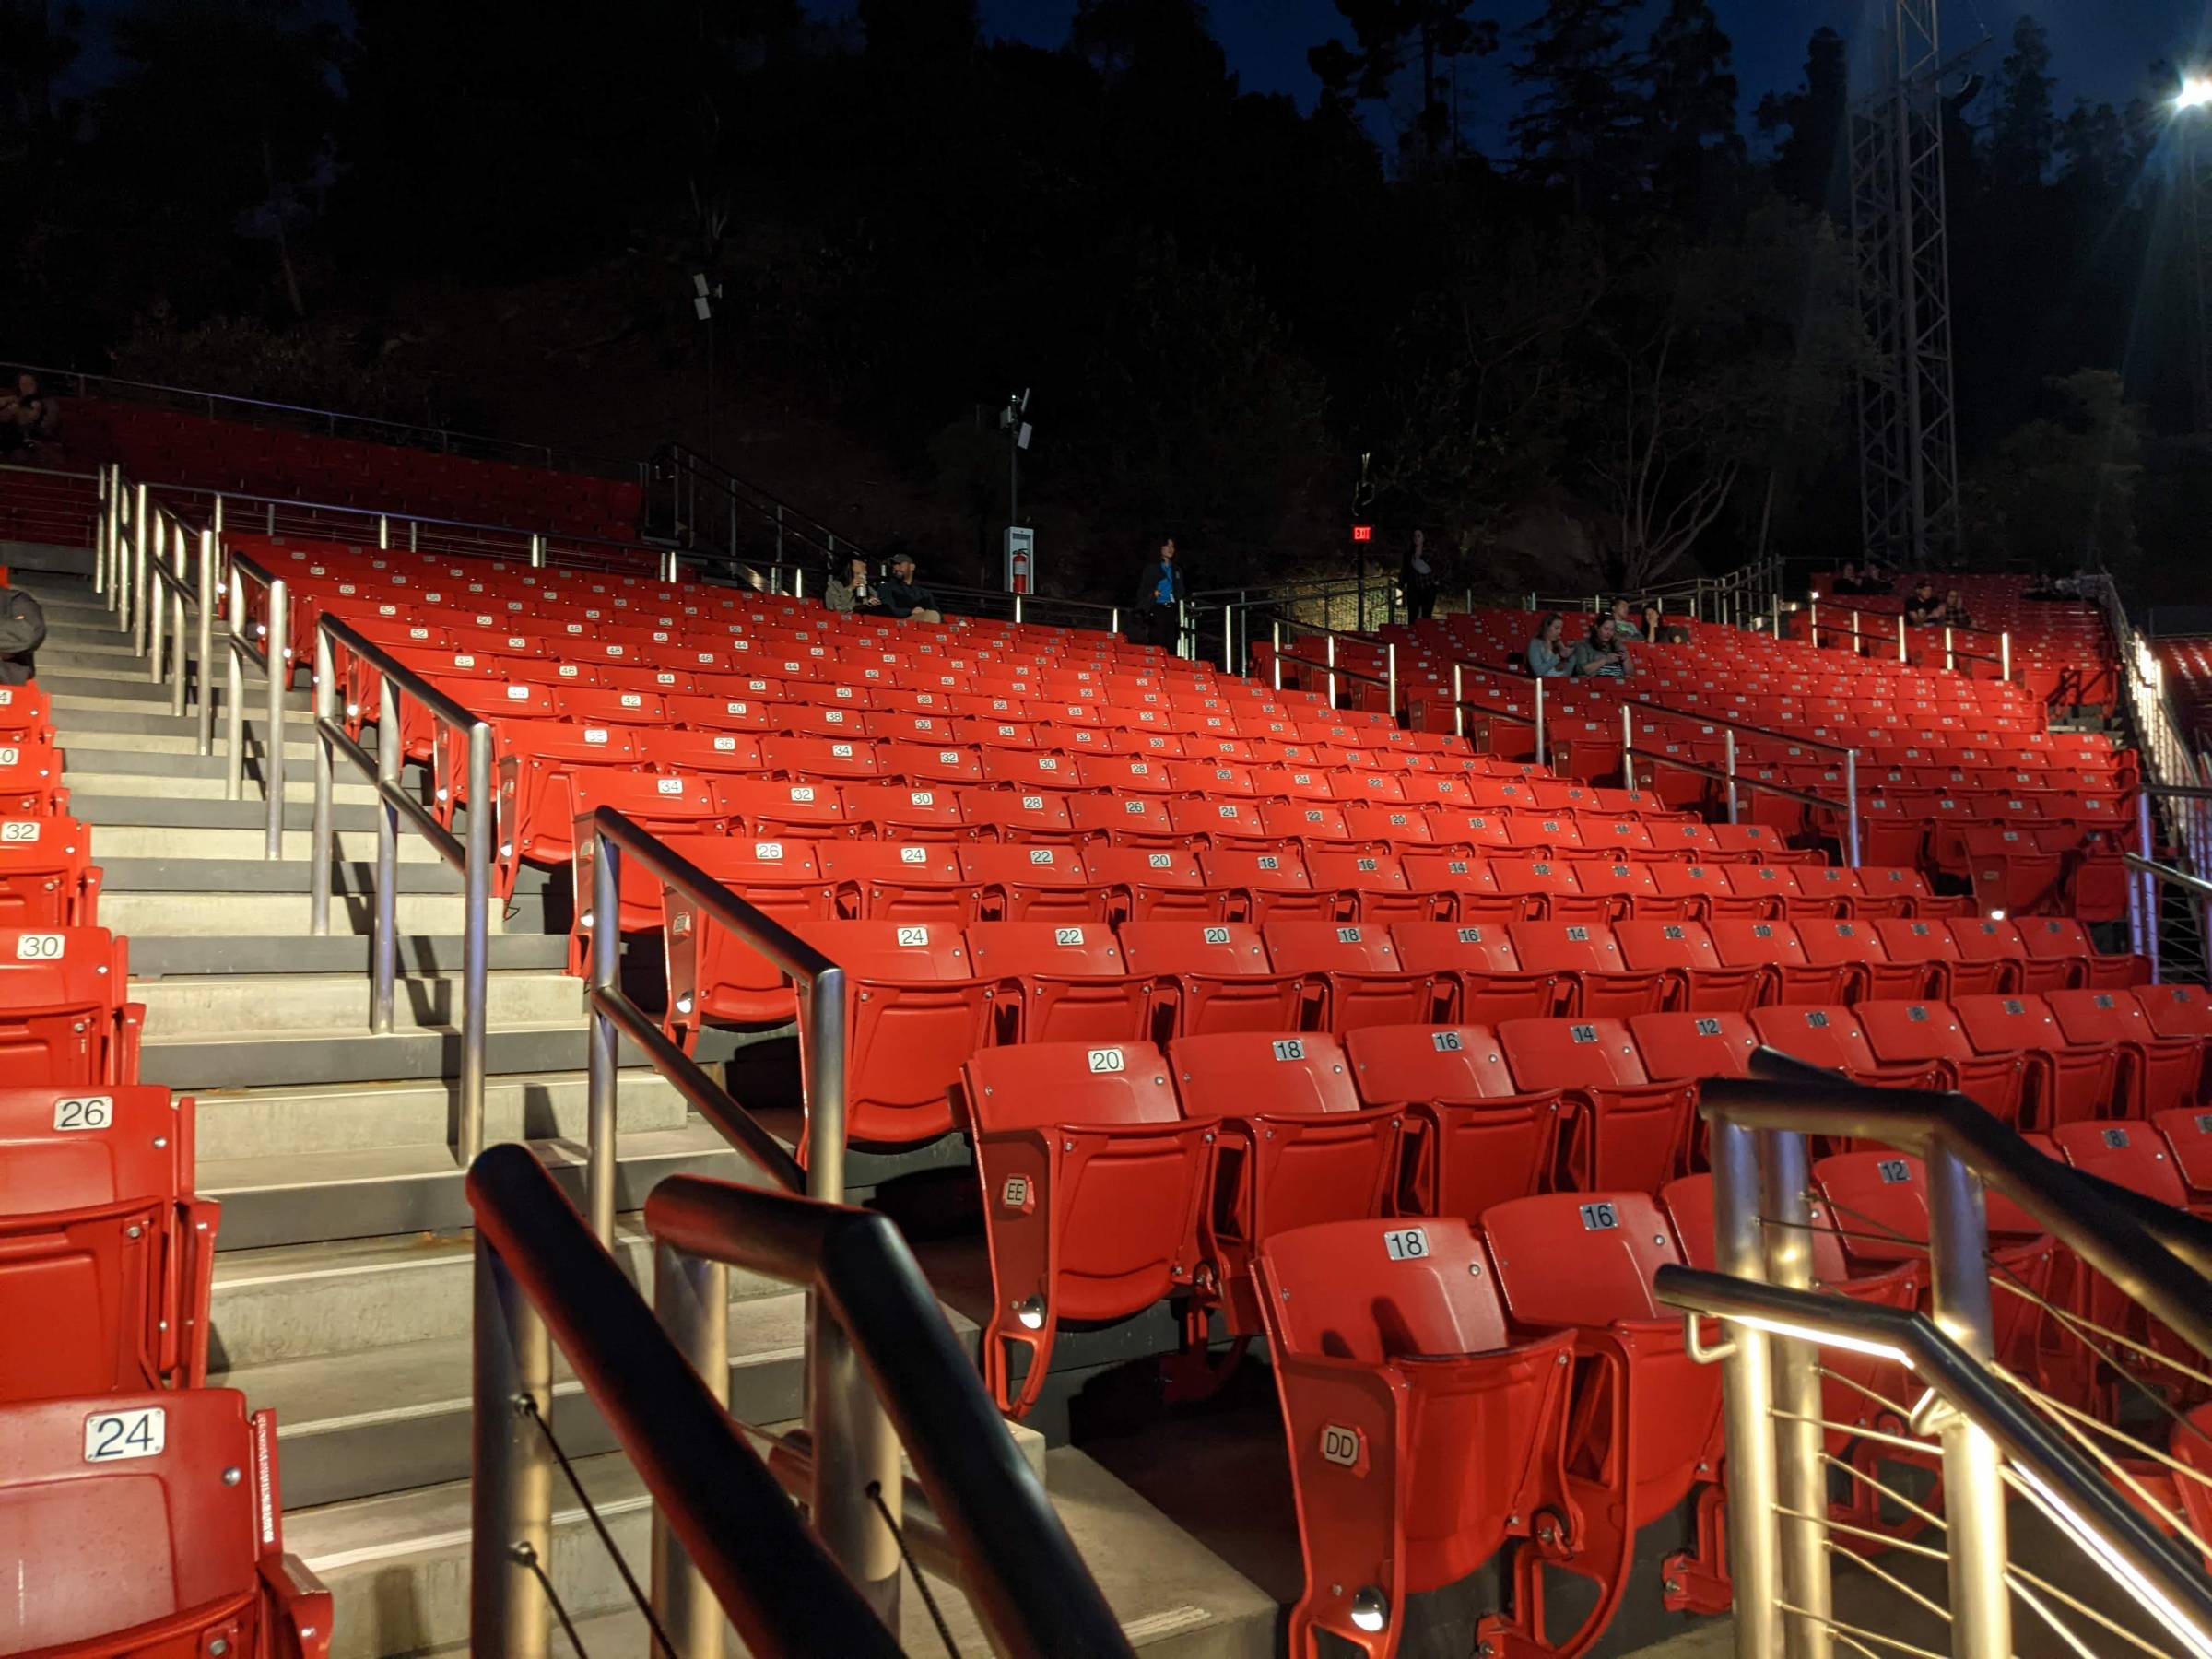 South Terrace At Greek Theatre 20221026 8563 